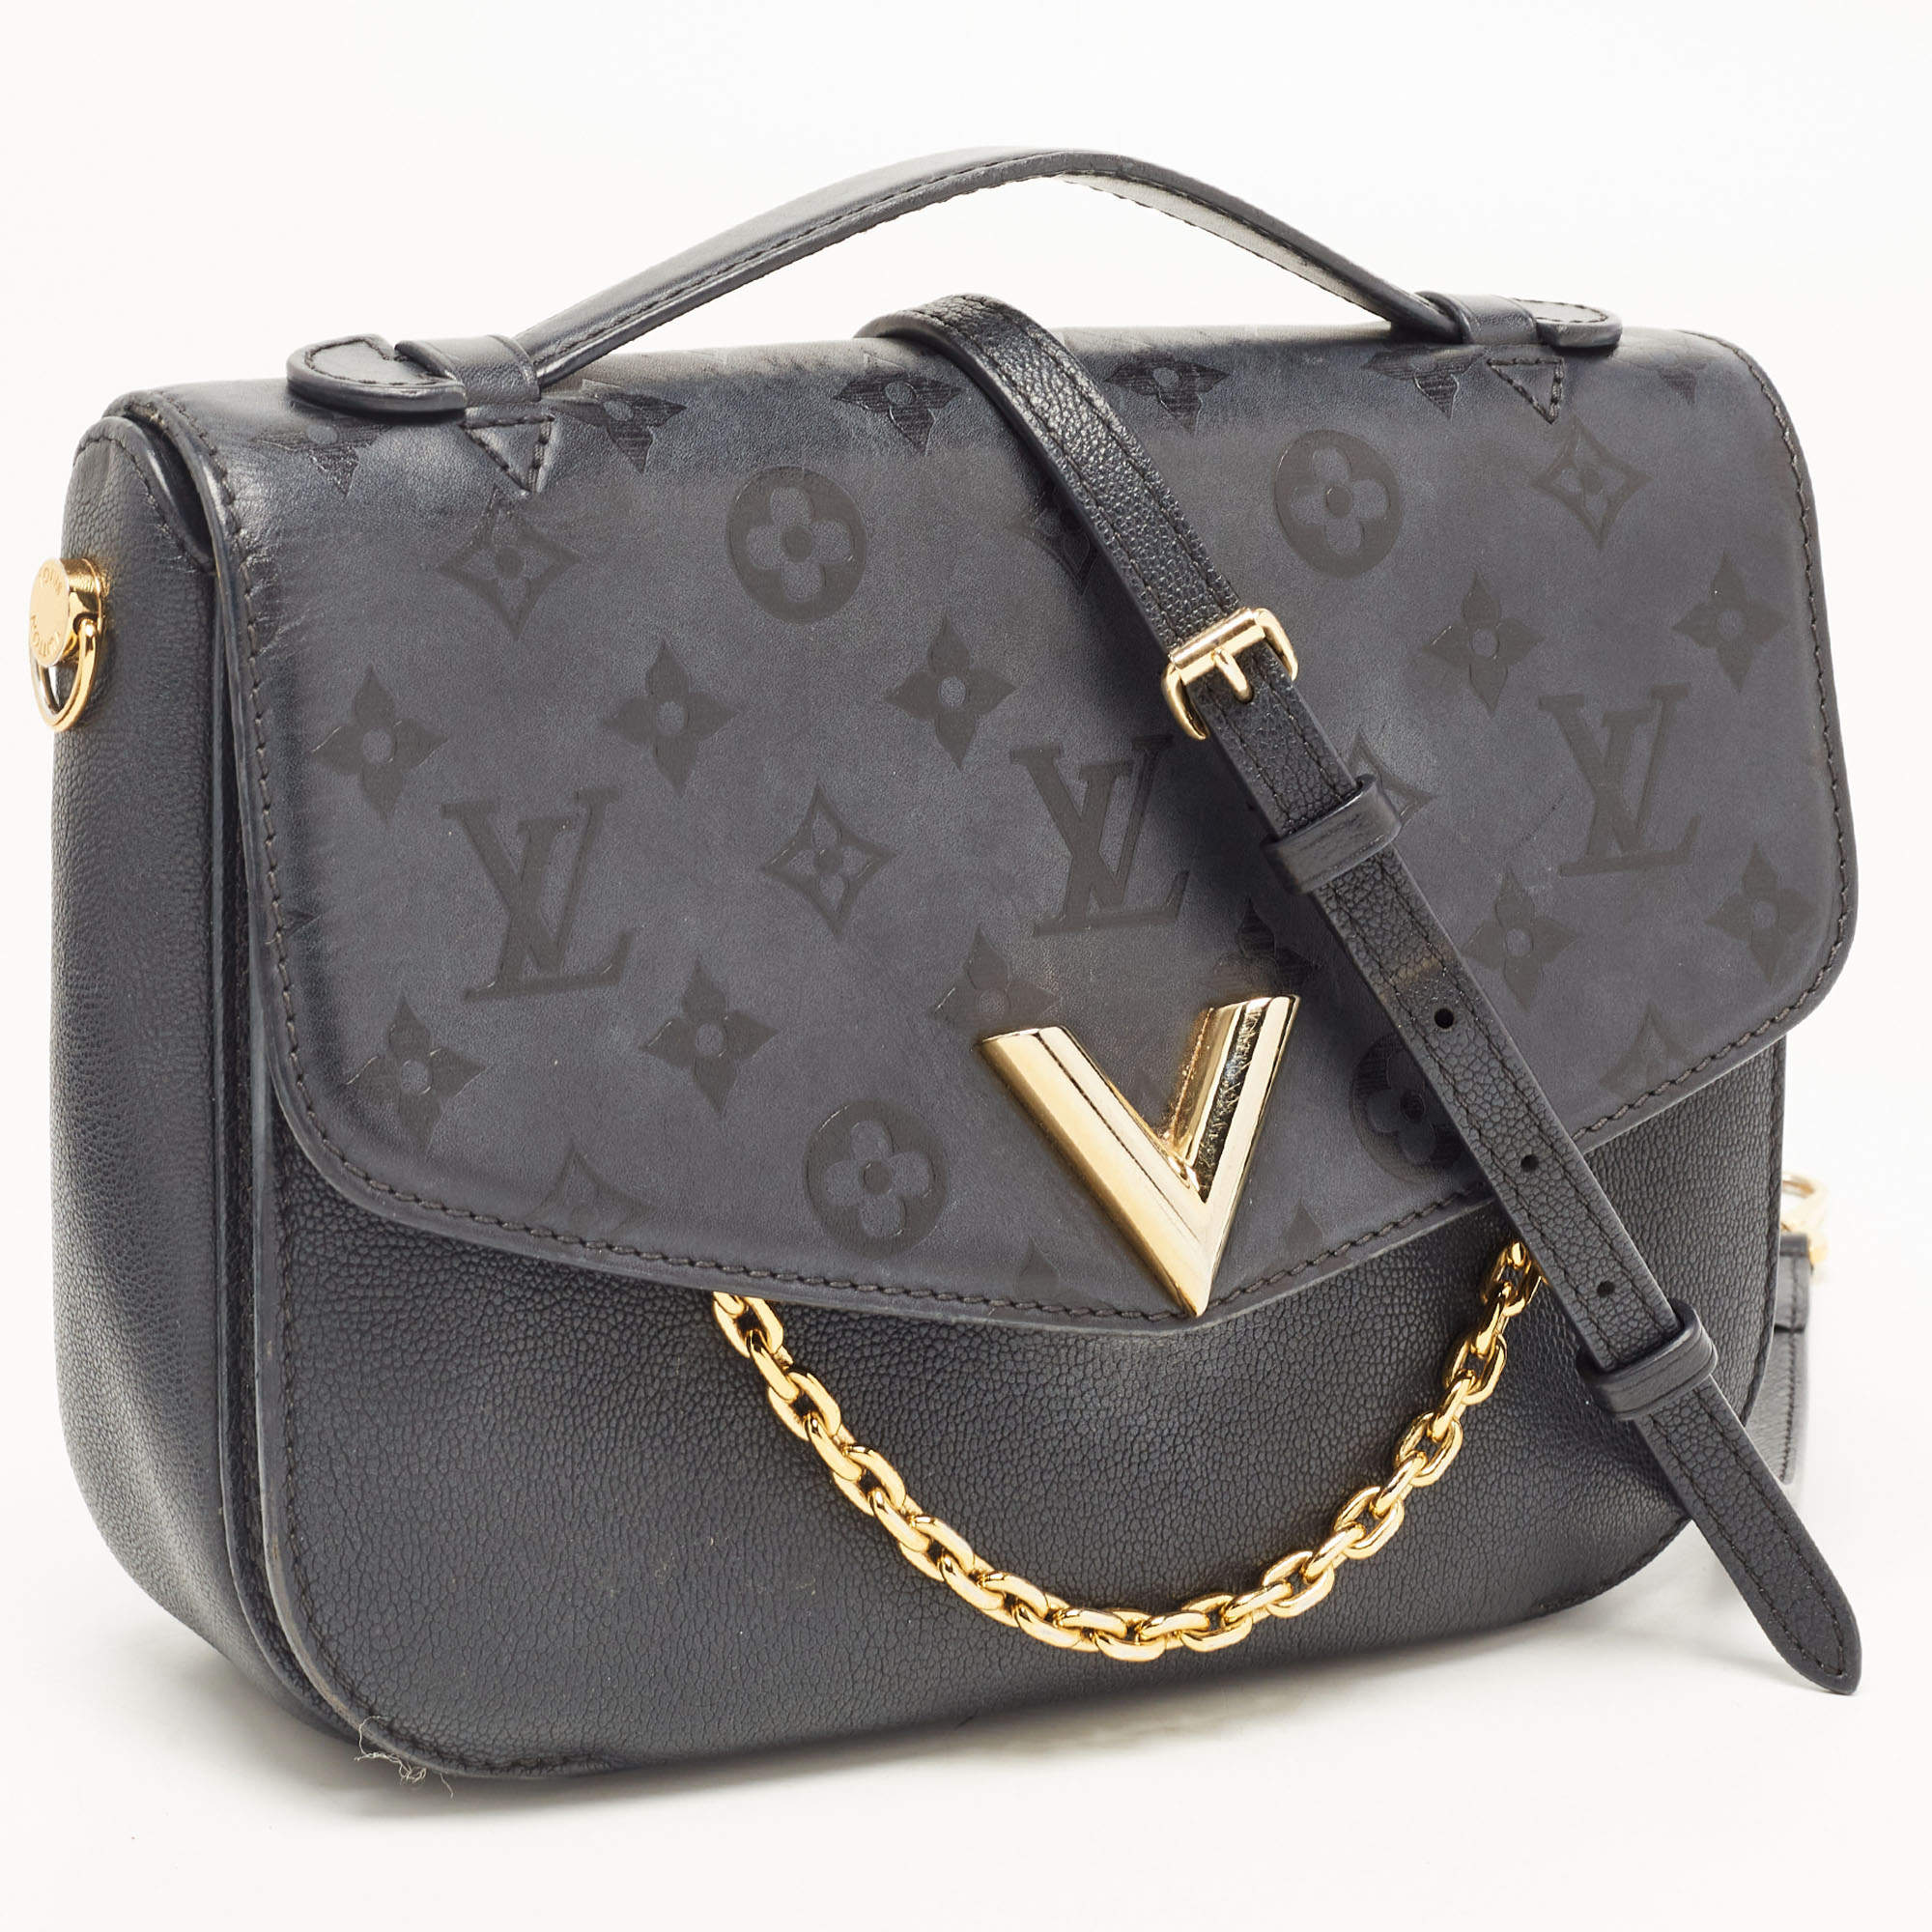 louis vuitton small shoulder bag with chain